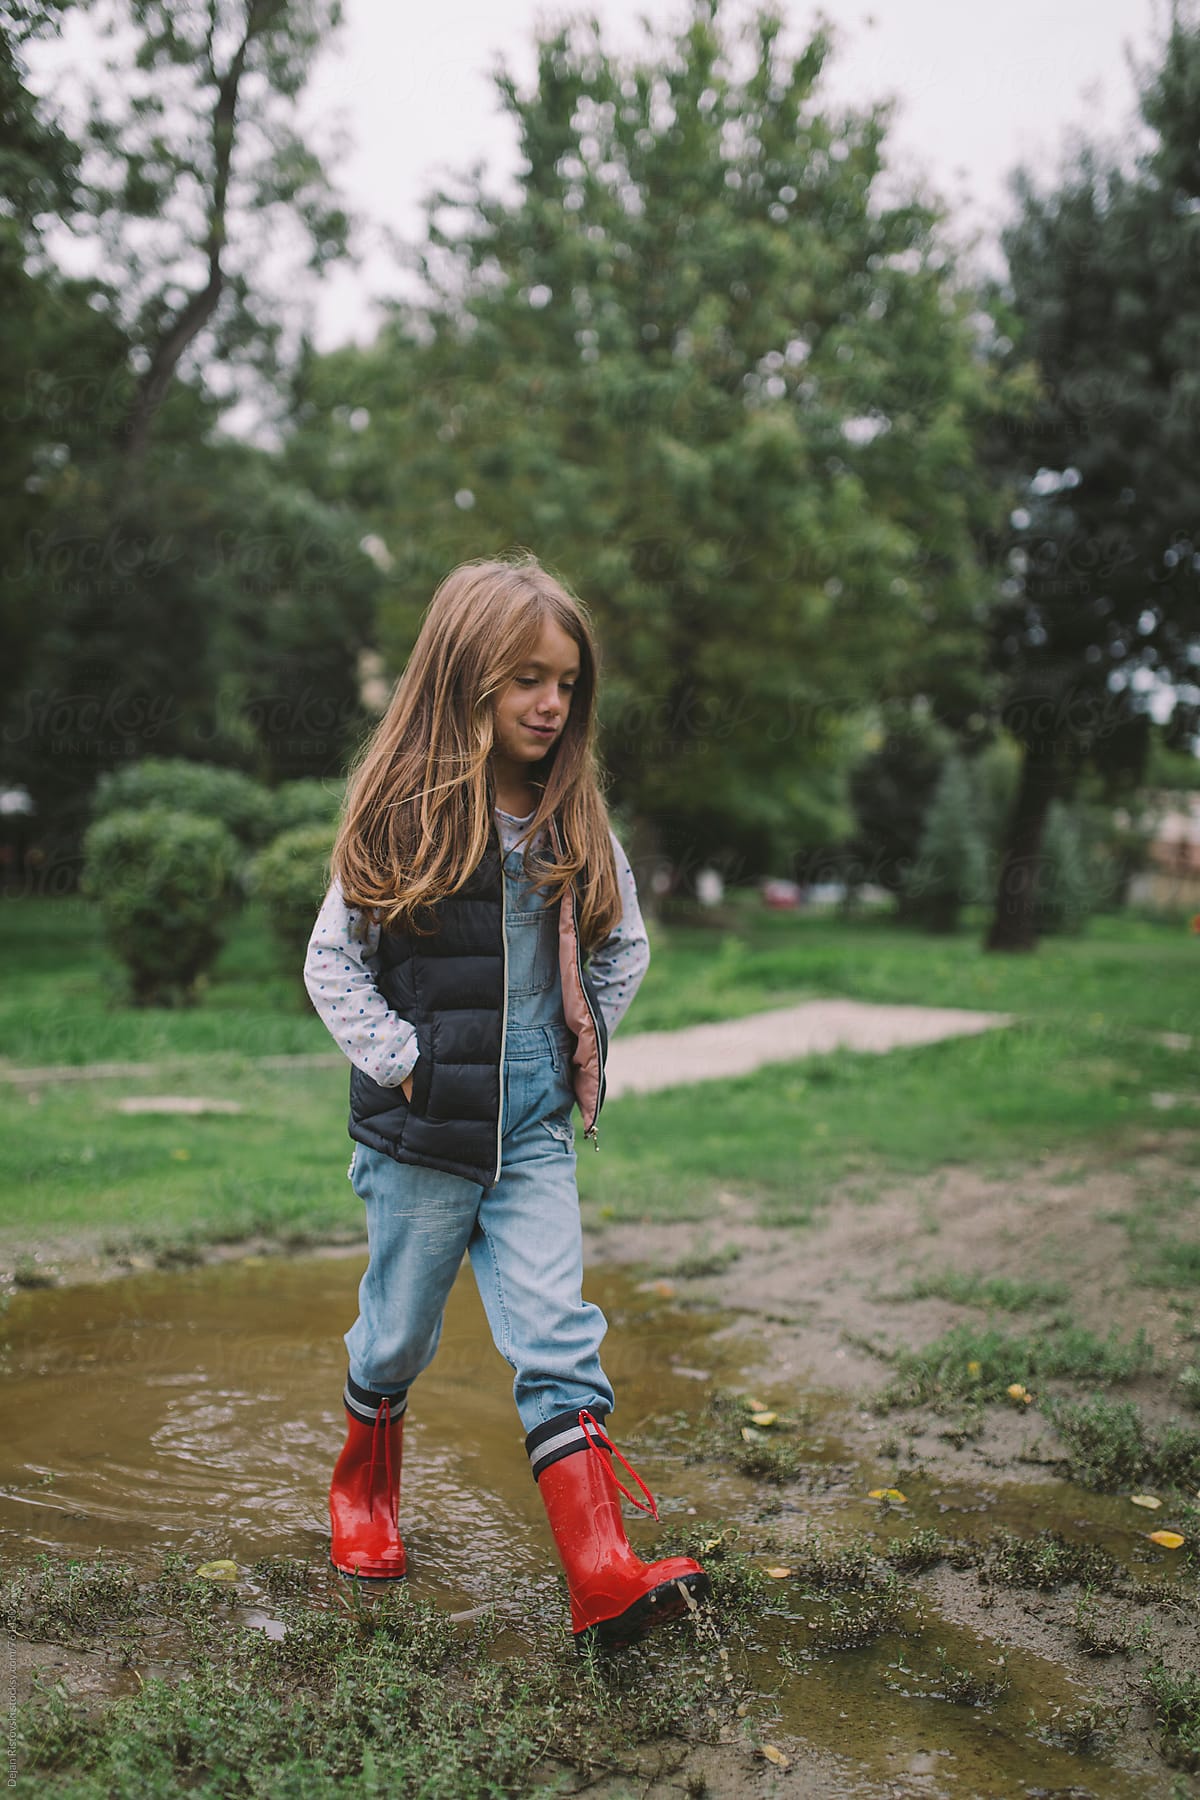 Child walking in water after rain